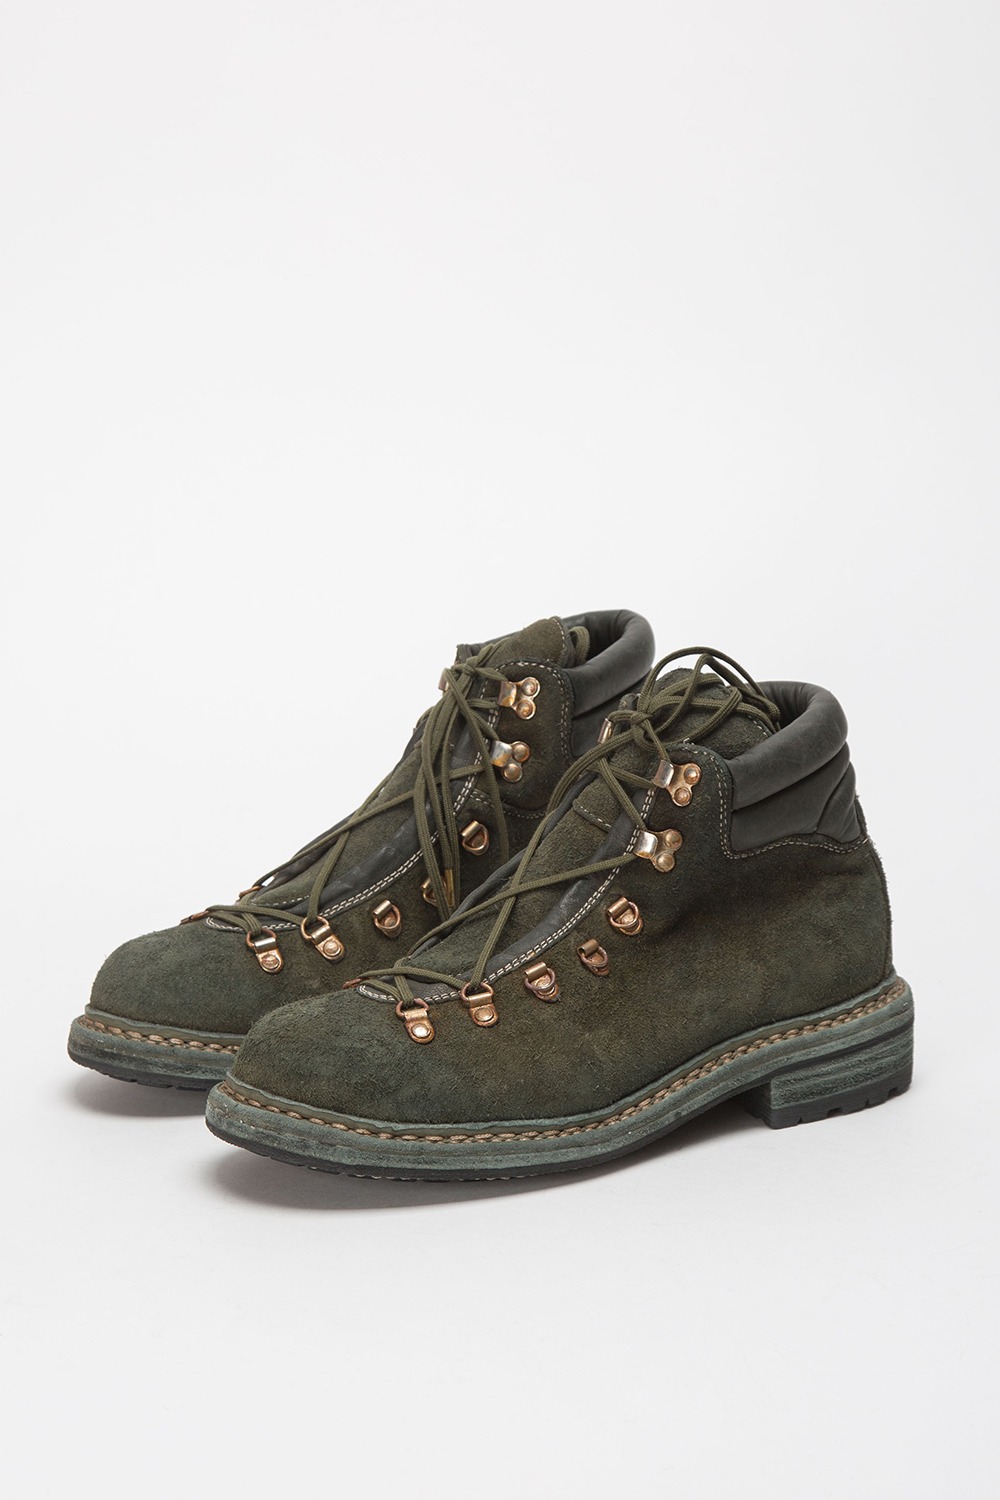 (23FW)19 REVERSE - HIKING BOOT SOLE RUBBER (CV31T)